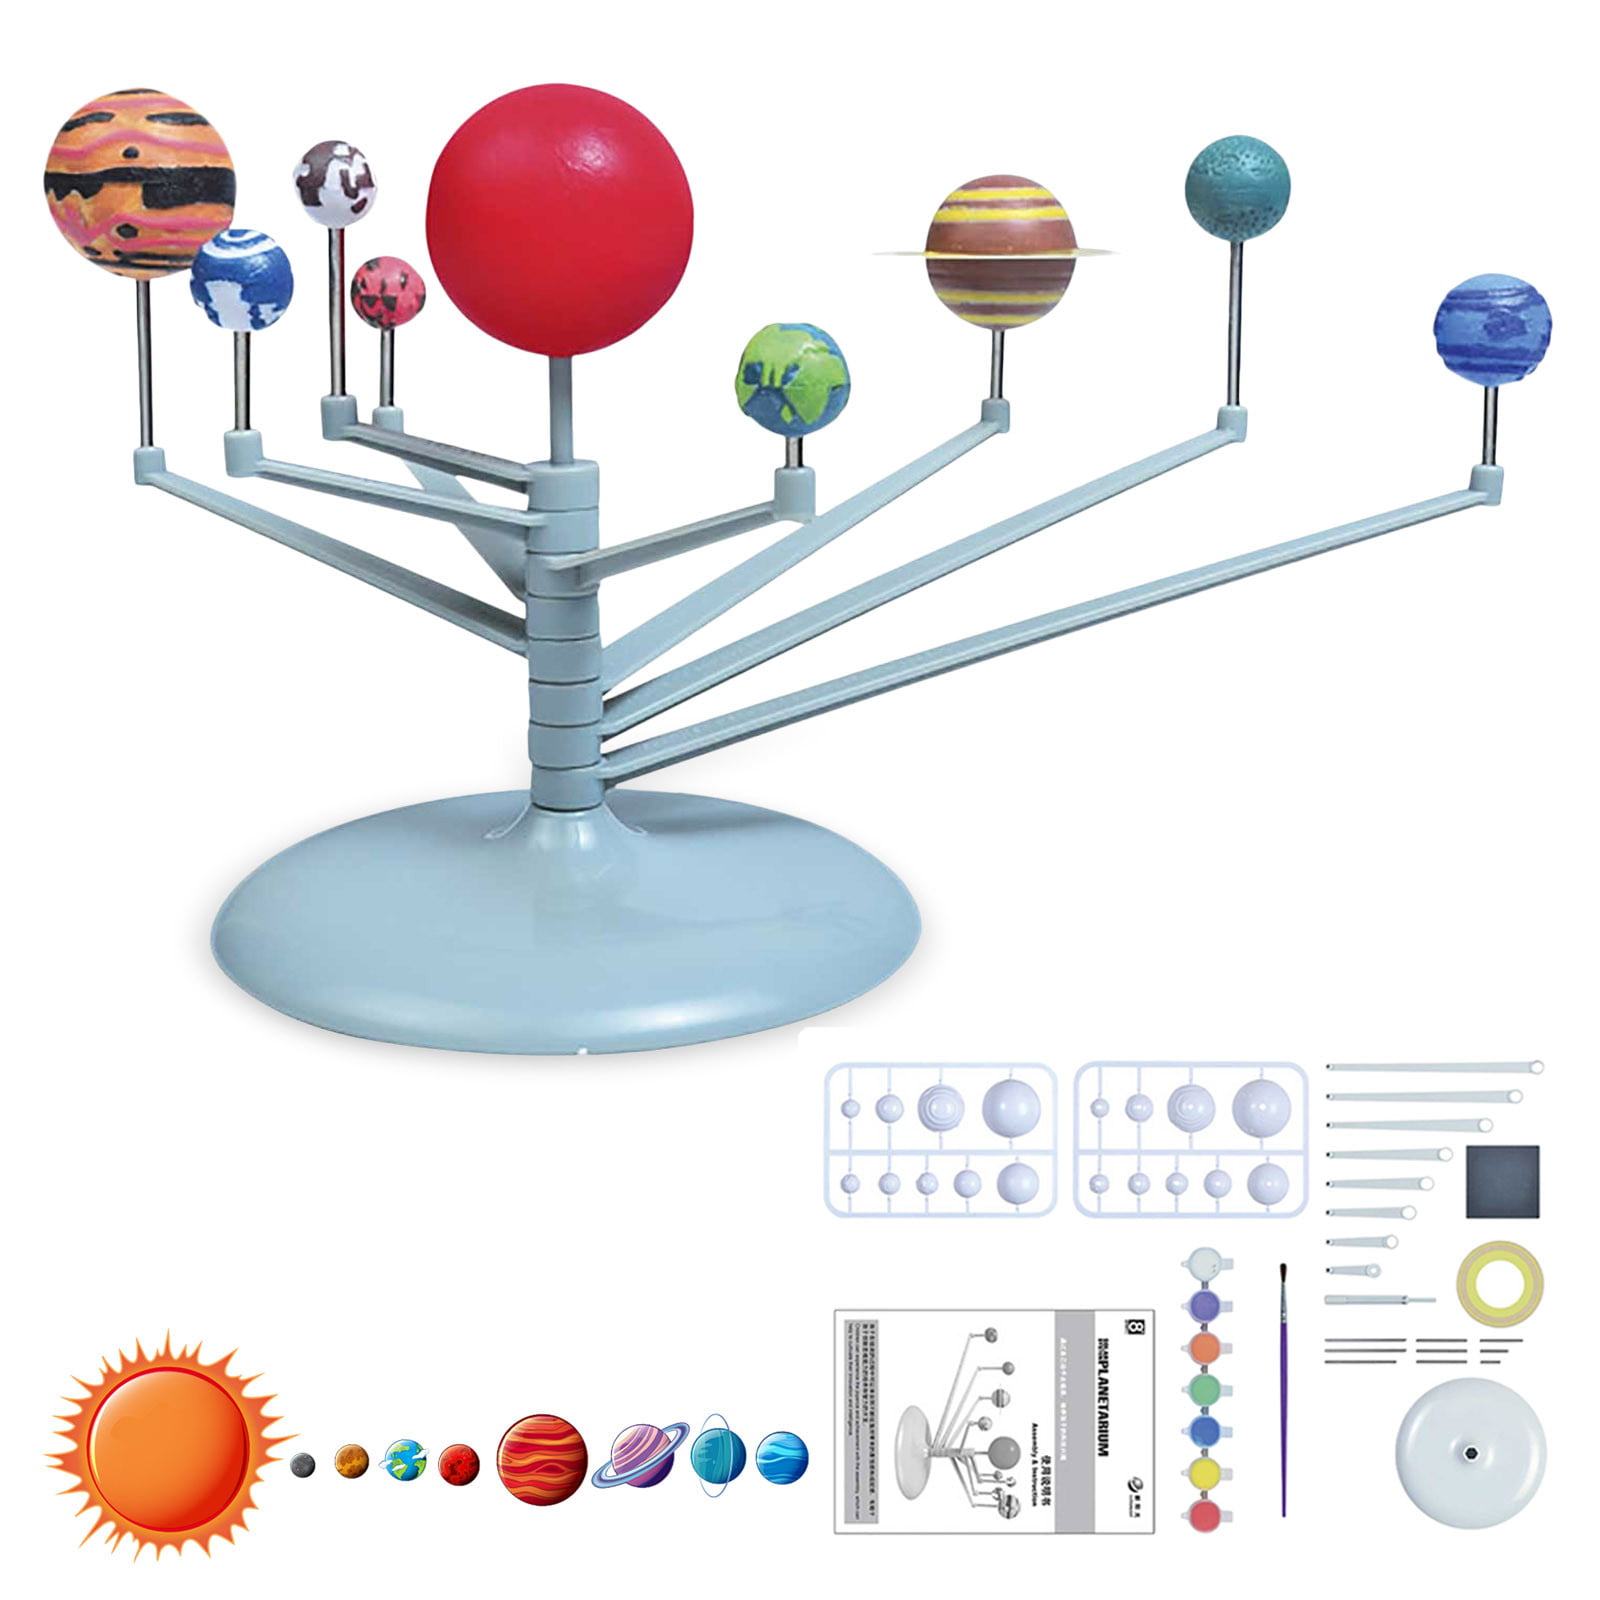 Nine Planets Solar System Astronomy Painting Kit New Planetarium Toy For  Arts And Science Laboratory Technology Enthusiasts From Jrelectronic,  $13.07